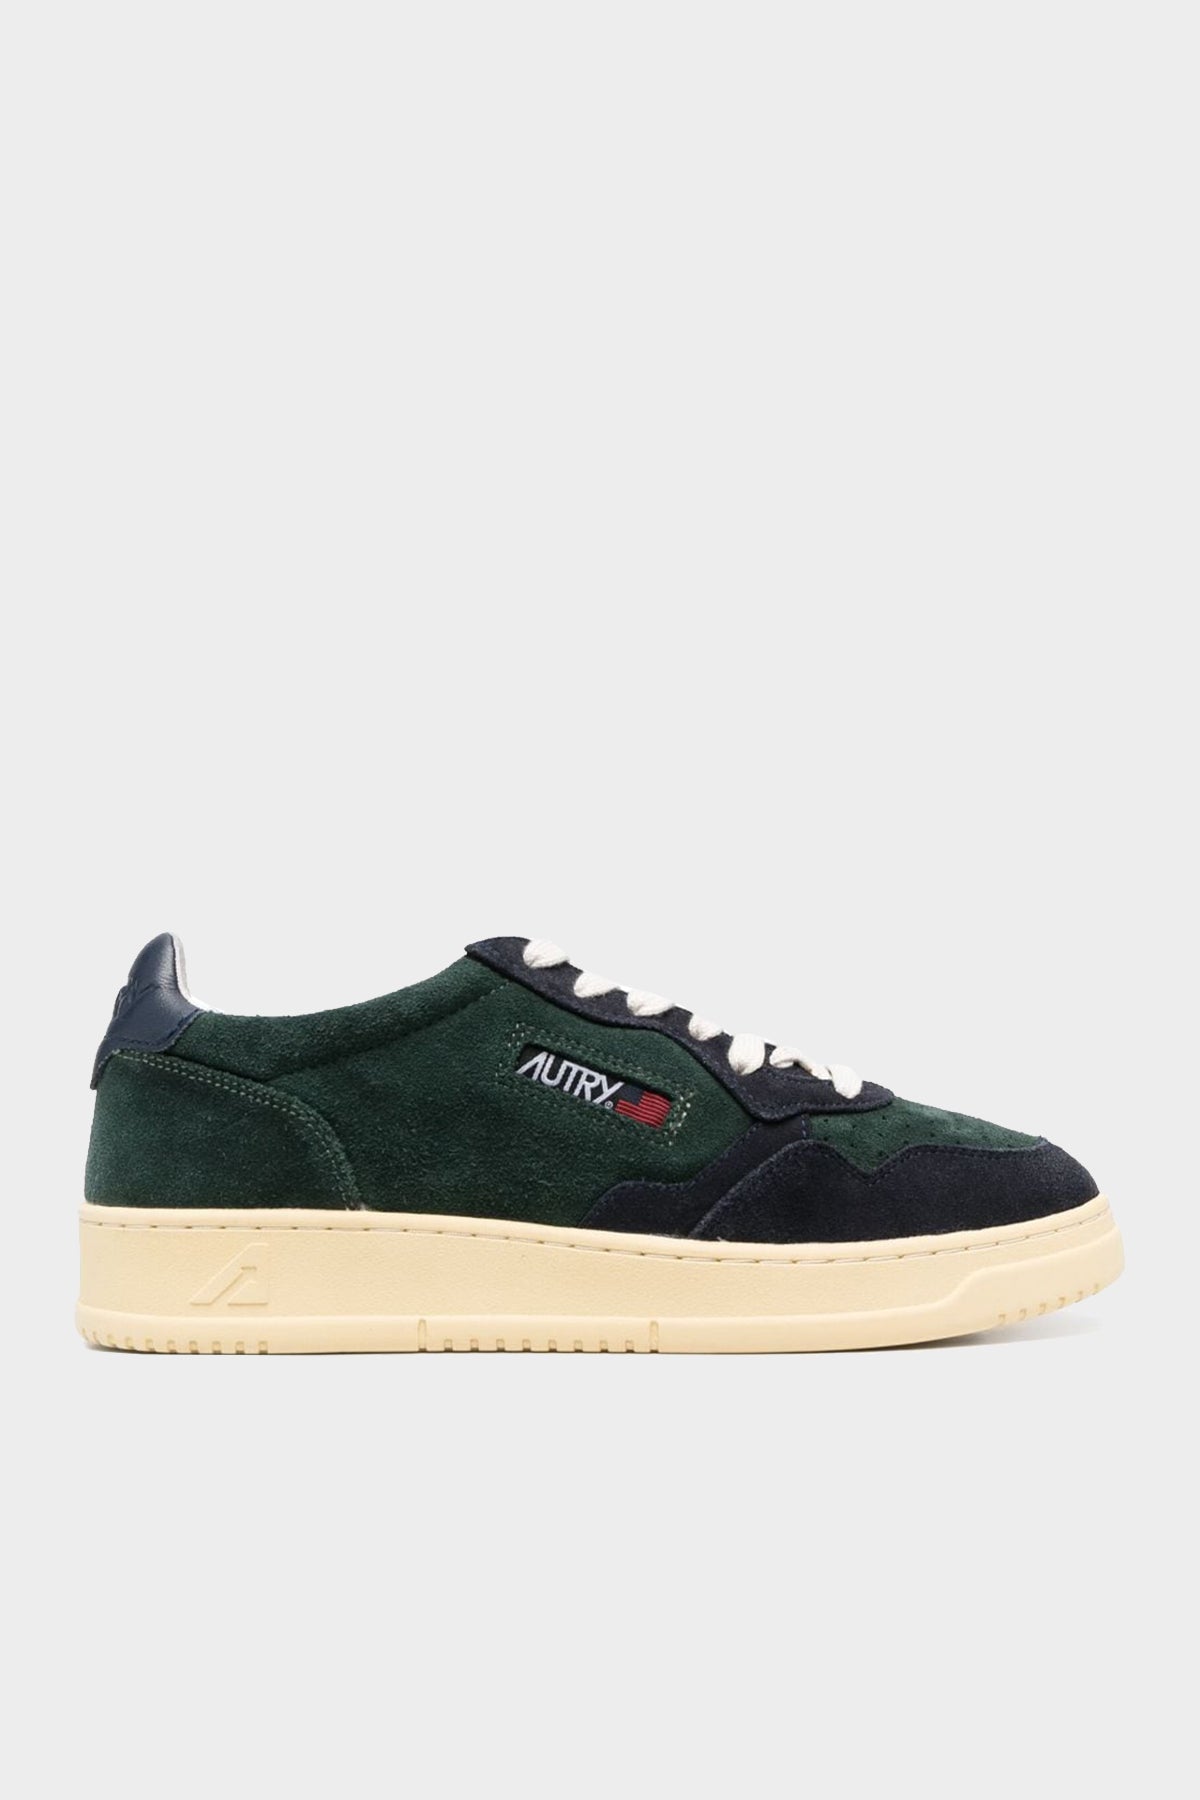 Medalist Low Suede Leather Men Sneaker in Green and Blue - shop-olivia.com